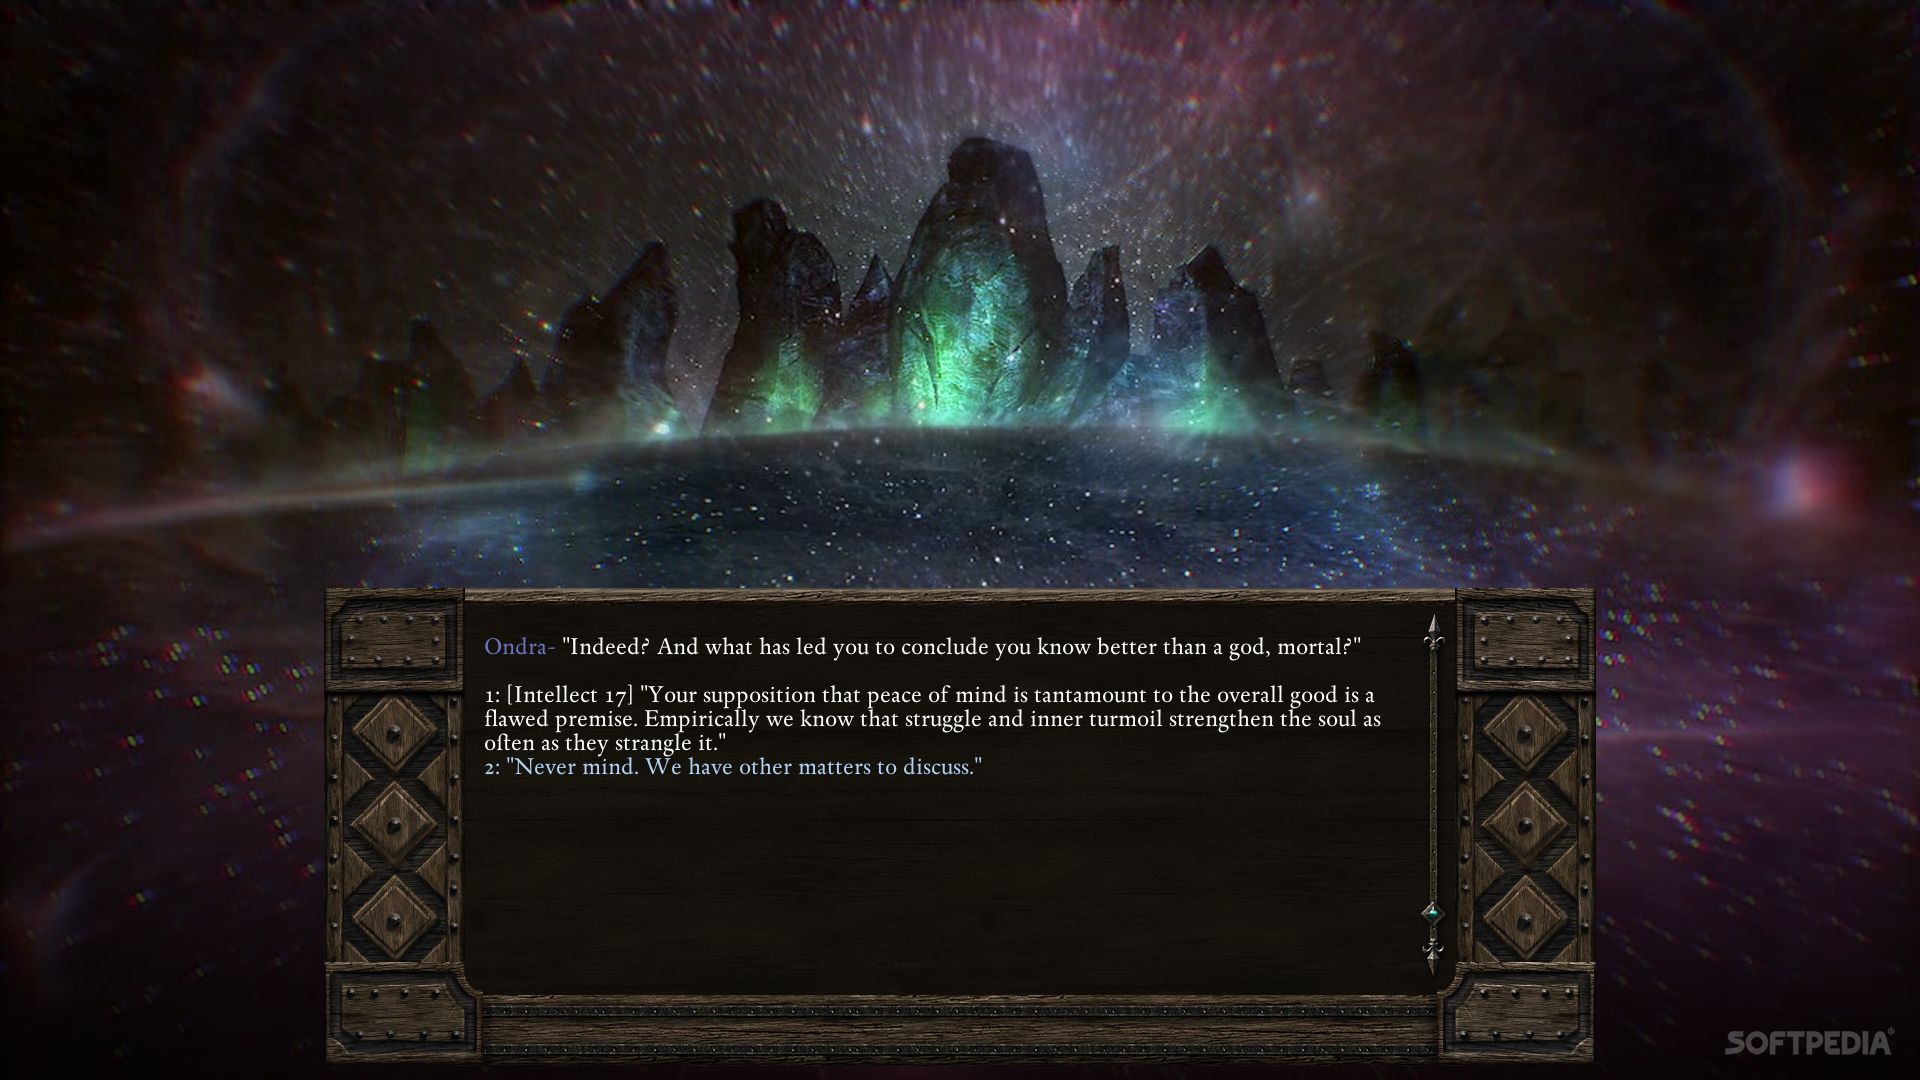 Pillars of Eternity: The White March - Part 2 Images. 